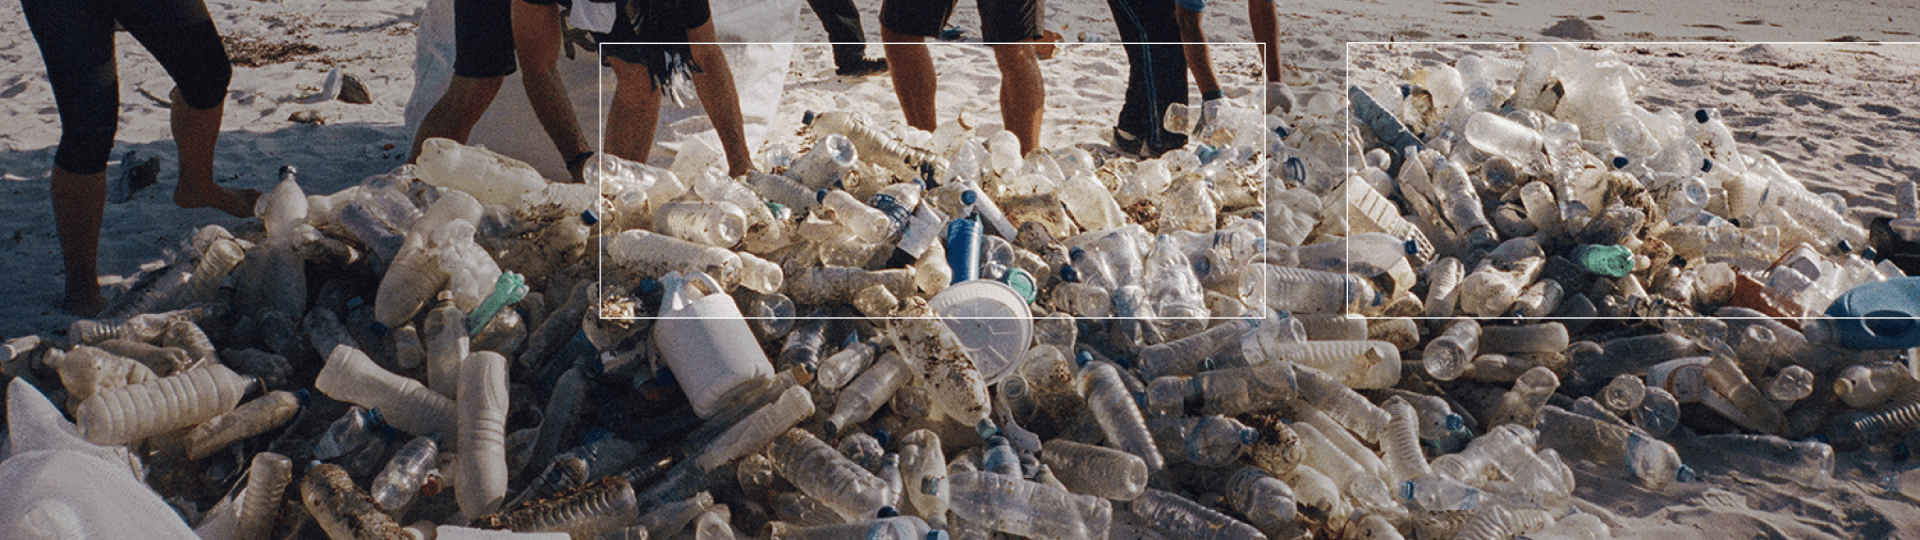 People cleaning up plastic bottles from a beach